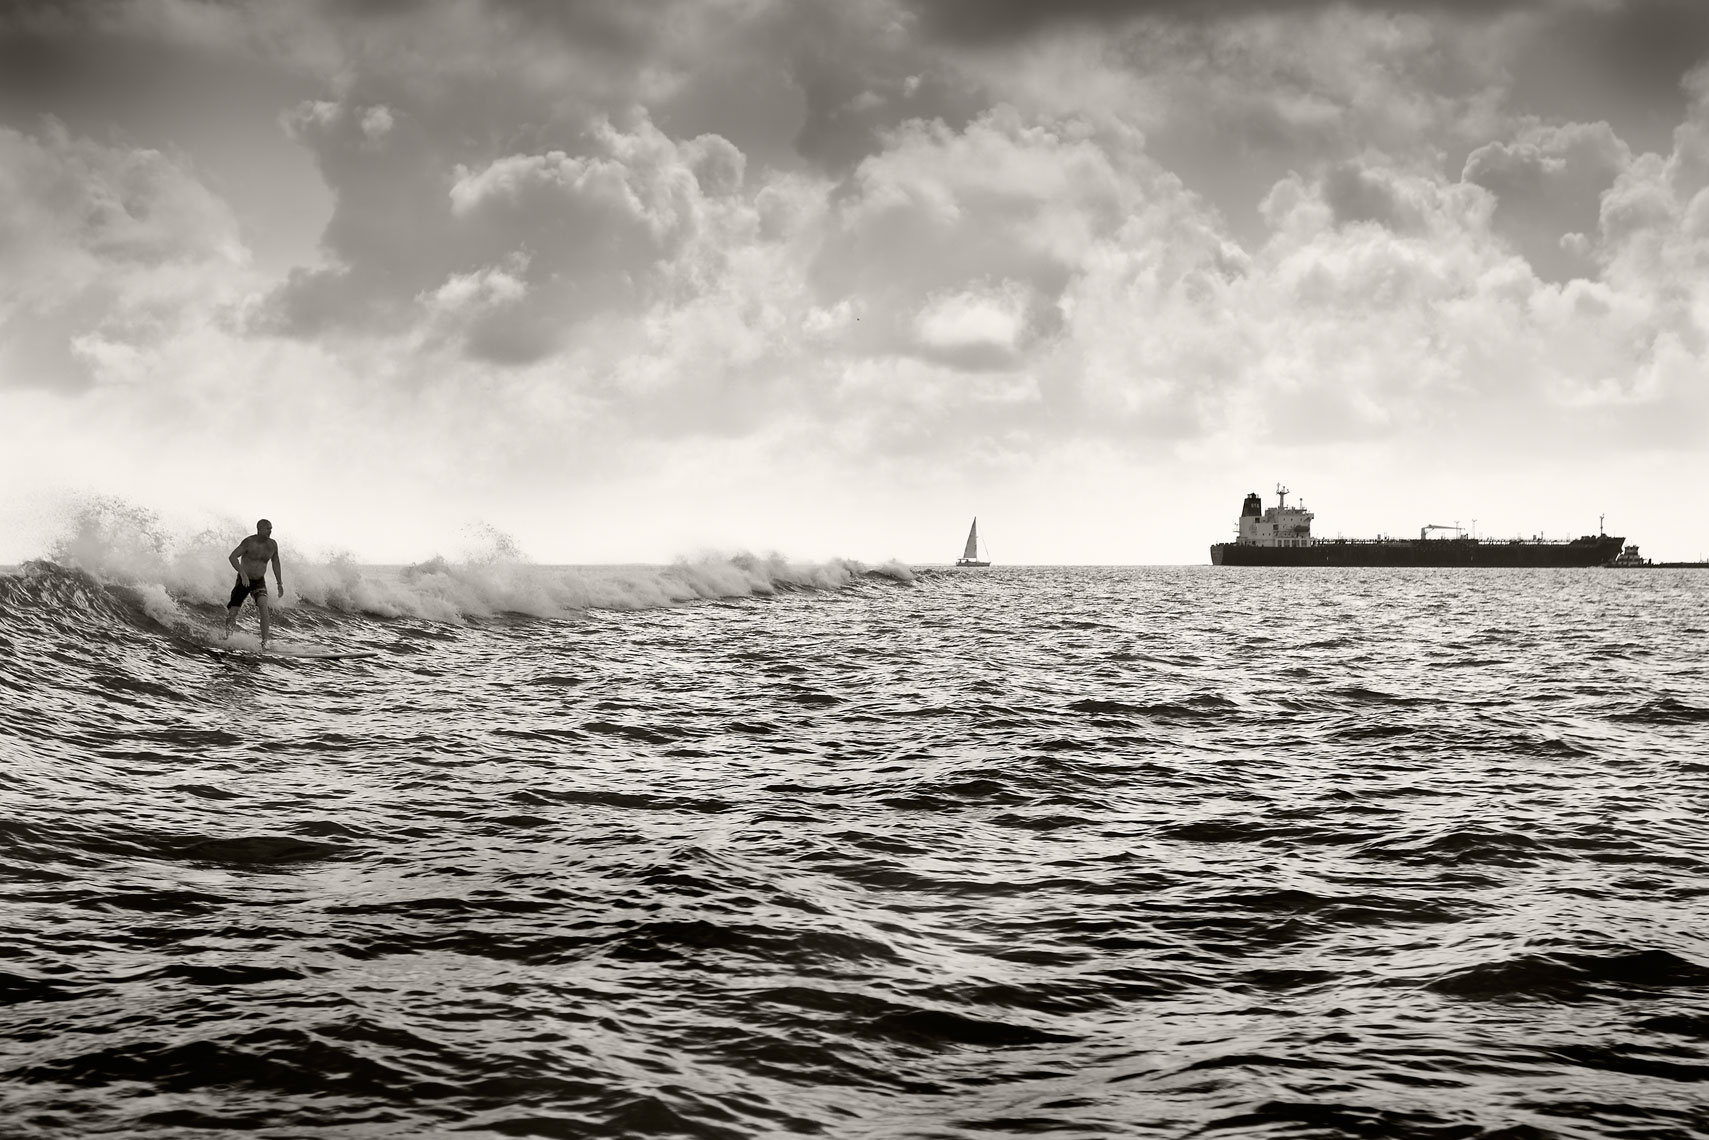 Tanker Surfing on a wave in Galveston Bay